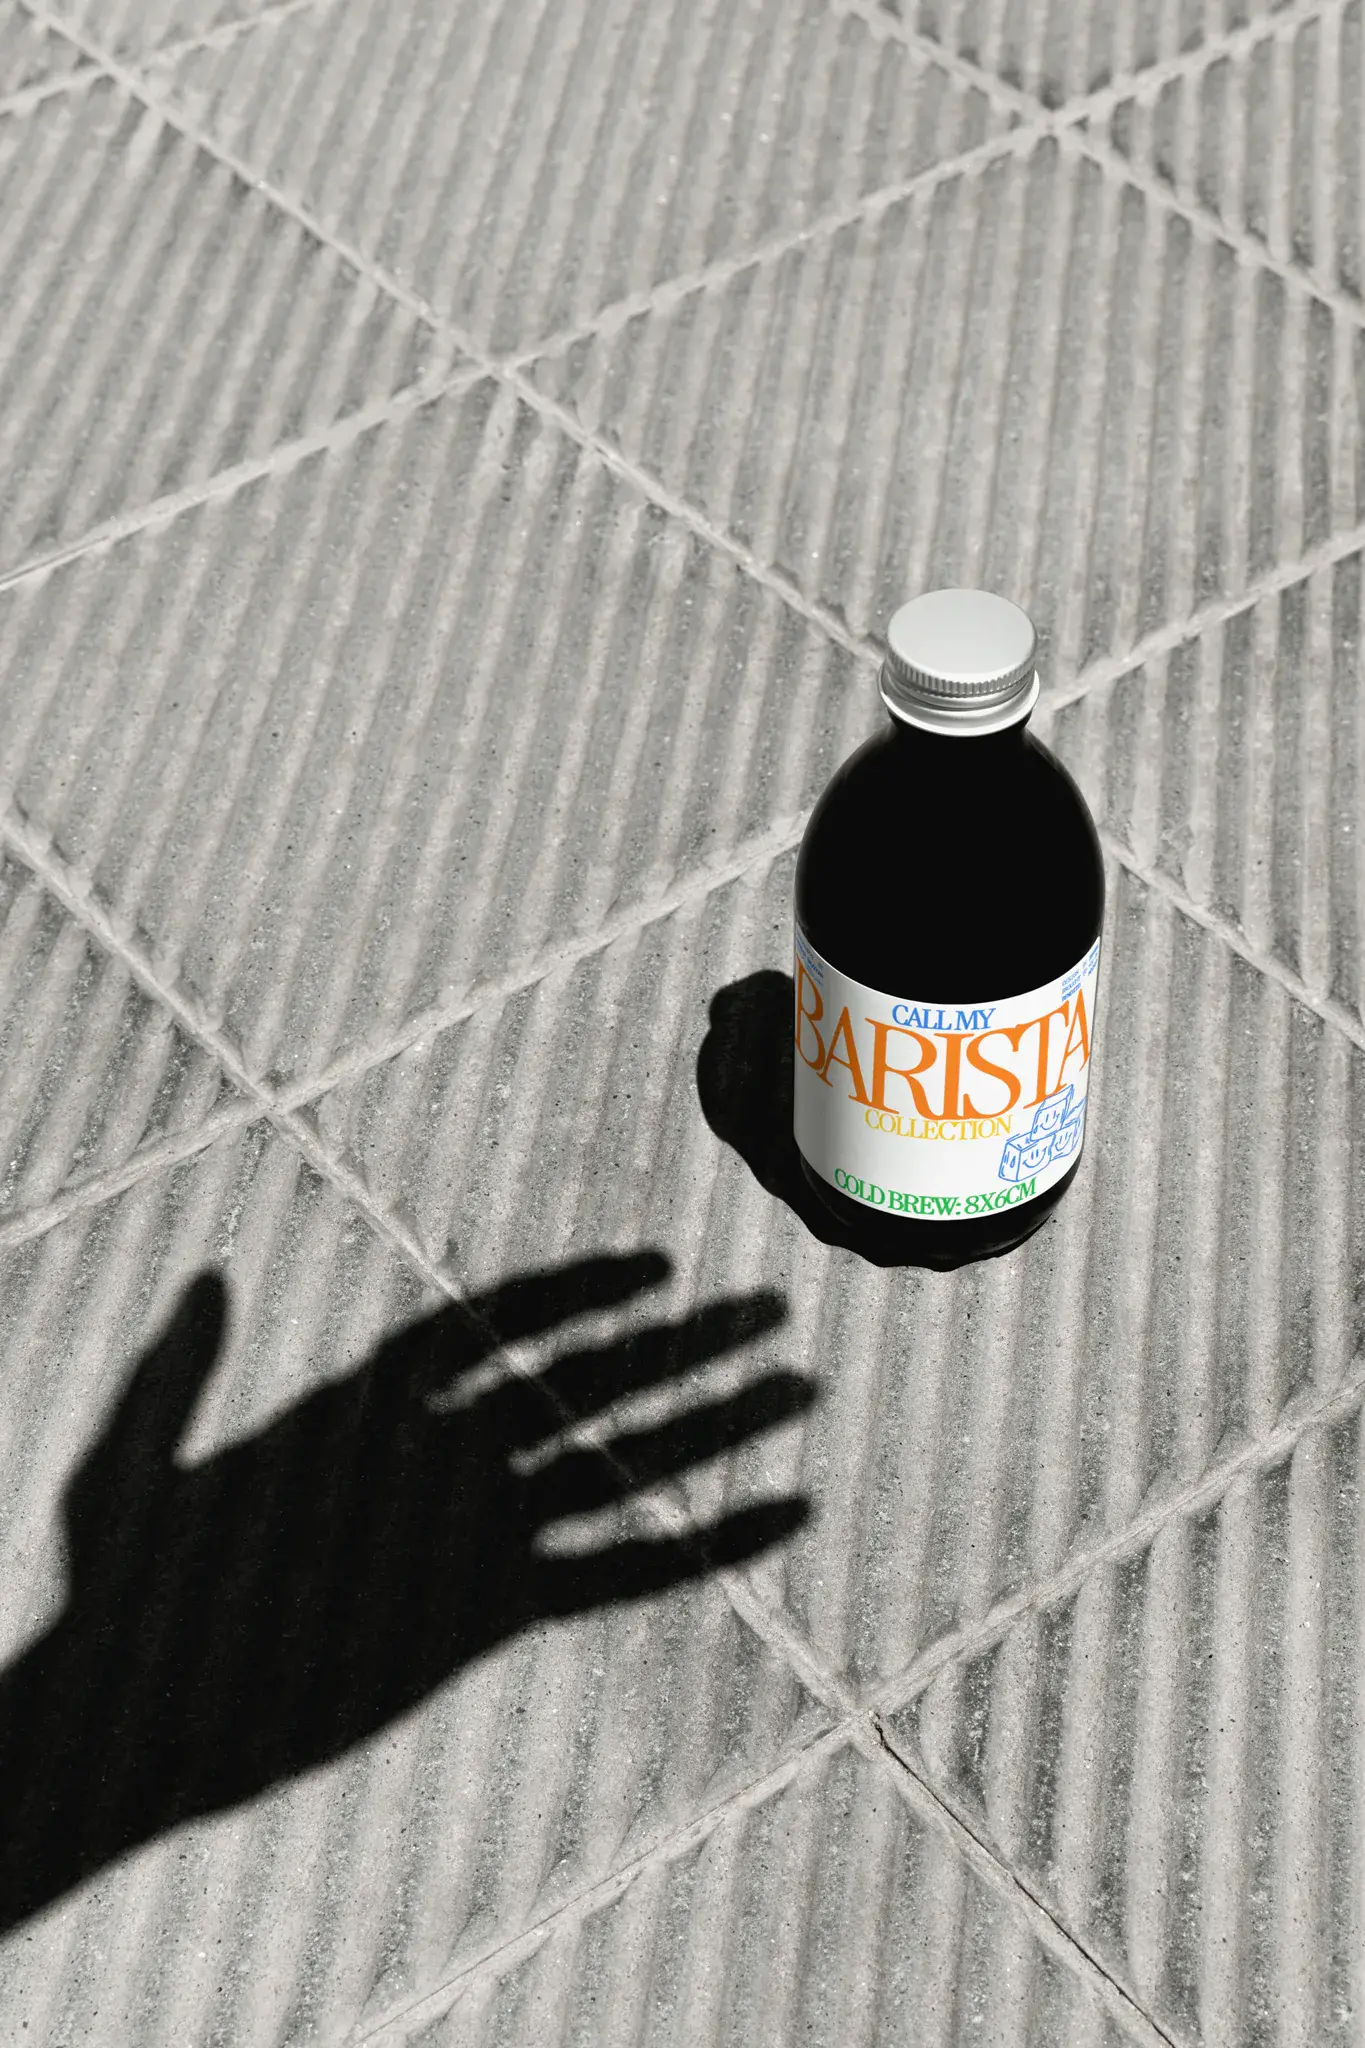 Cold brew coffee mockup laying on the street, concrete floor, surrounded by the shadow of a hand. Coffee bottle mockup, glass bottle mockup, coffee label mockup, liquor label mockup, packaging mockup, drink mockup, PSD file, high quality mockup.